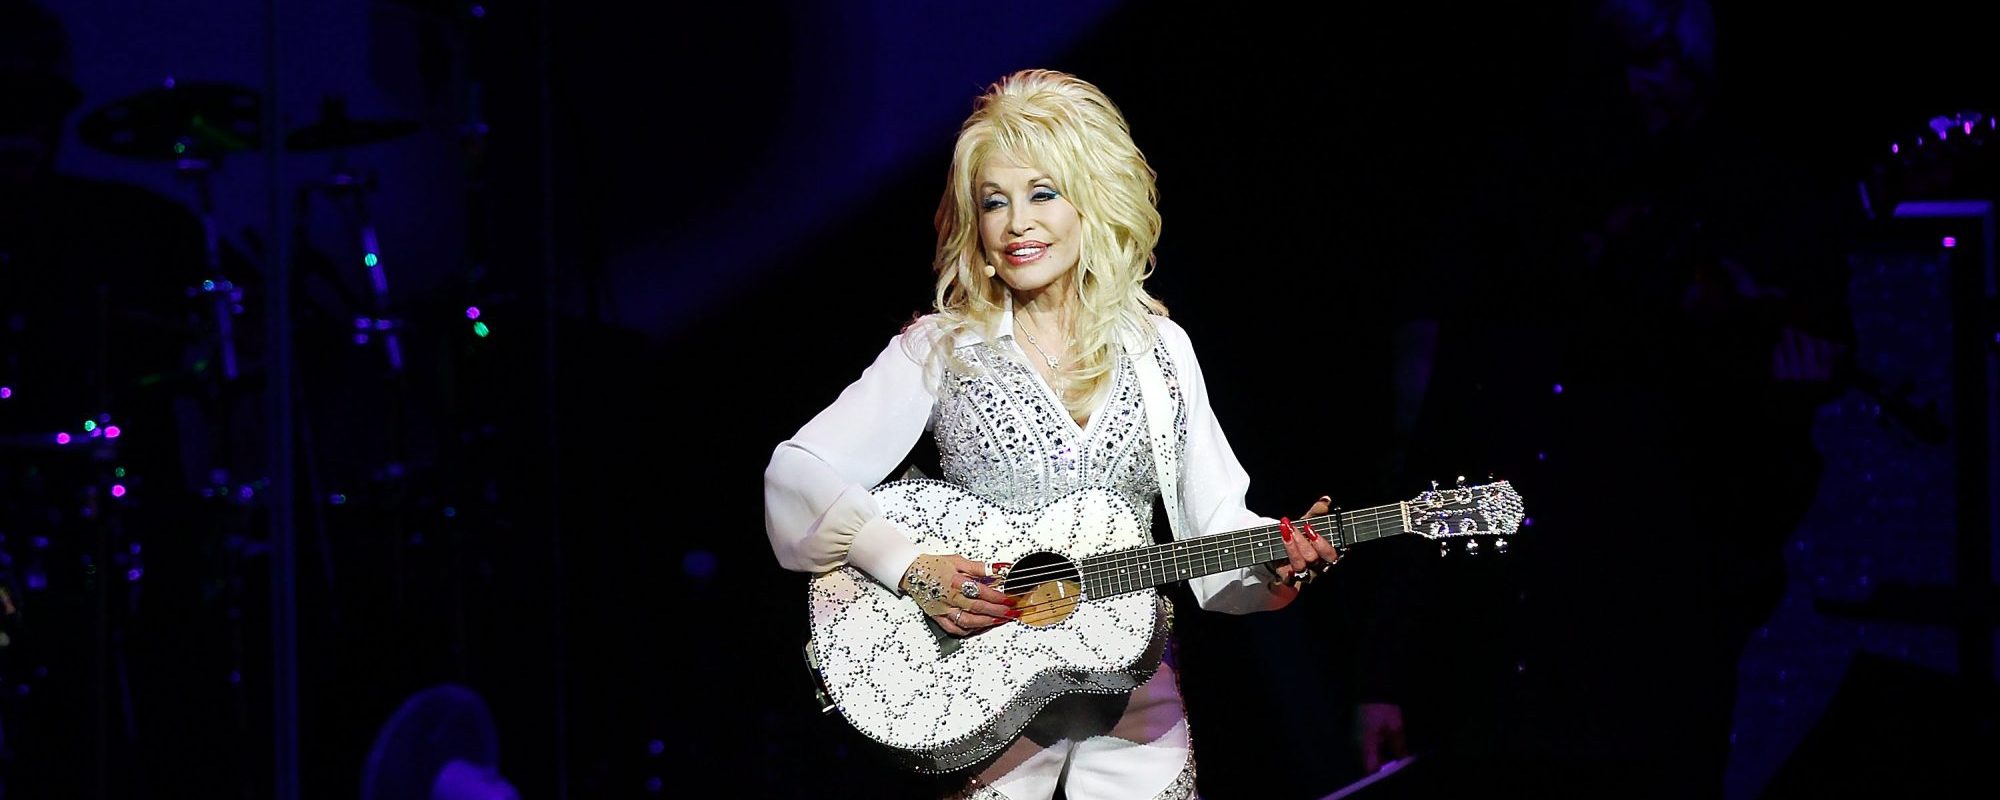 Ohio Governor Declares August 9 “Dolly Parton Day” in the State